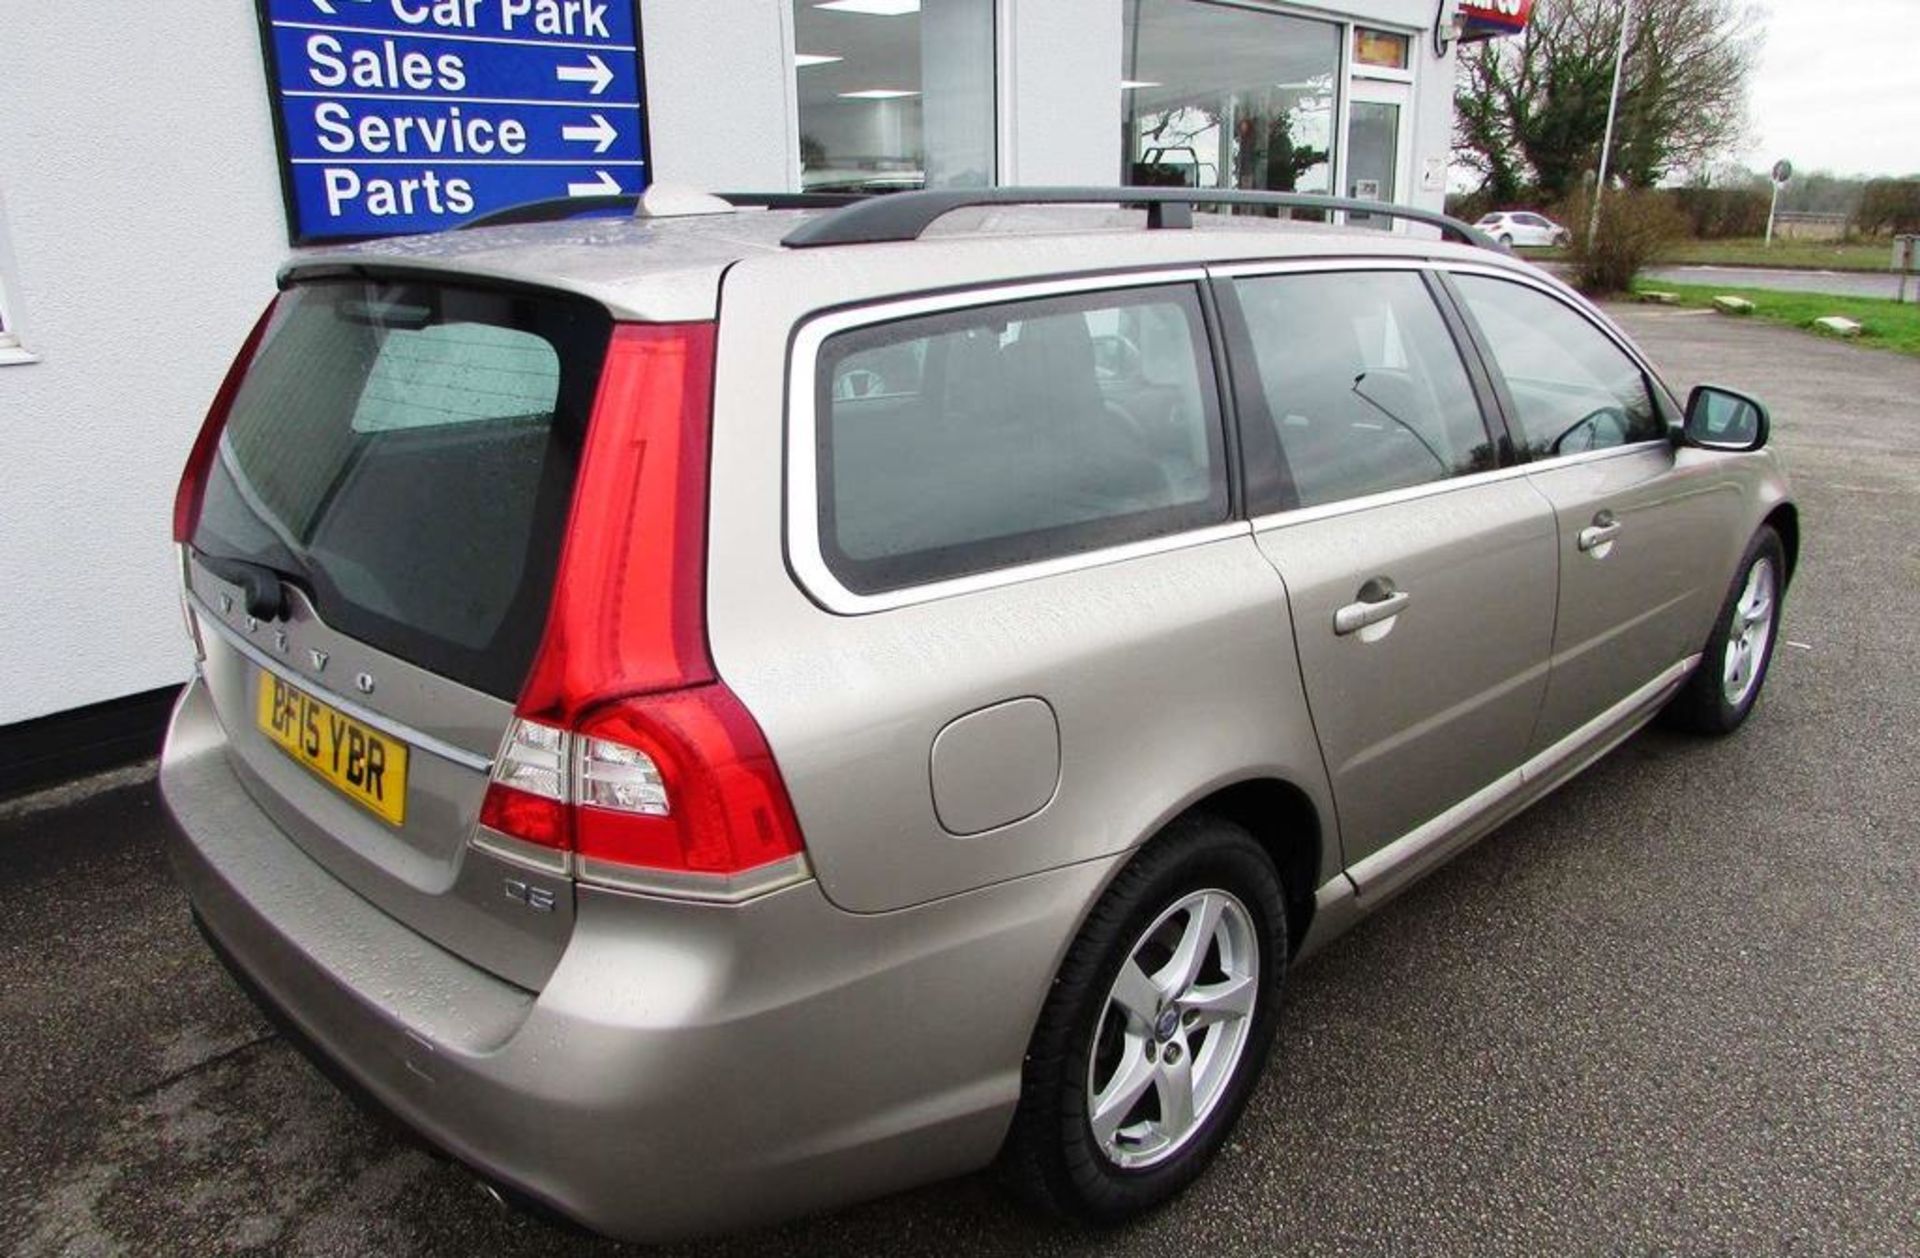 Volvo V70 2.4 D5 Business Edition 5dr | Reg: BF15 YBR | Mileage: 73,000 | Forecourt Price £9,890 - Image 4 of 14